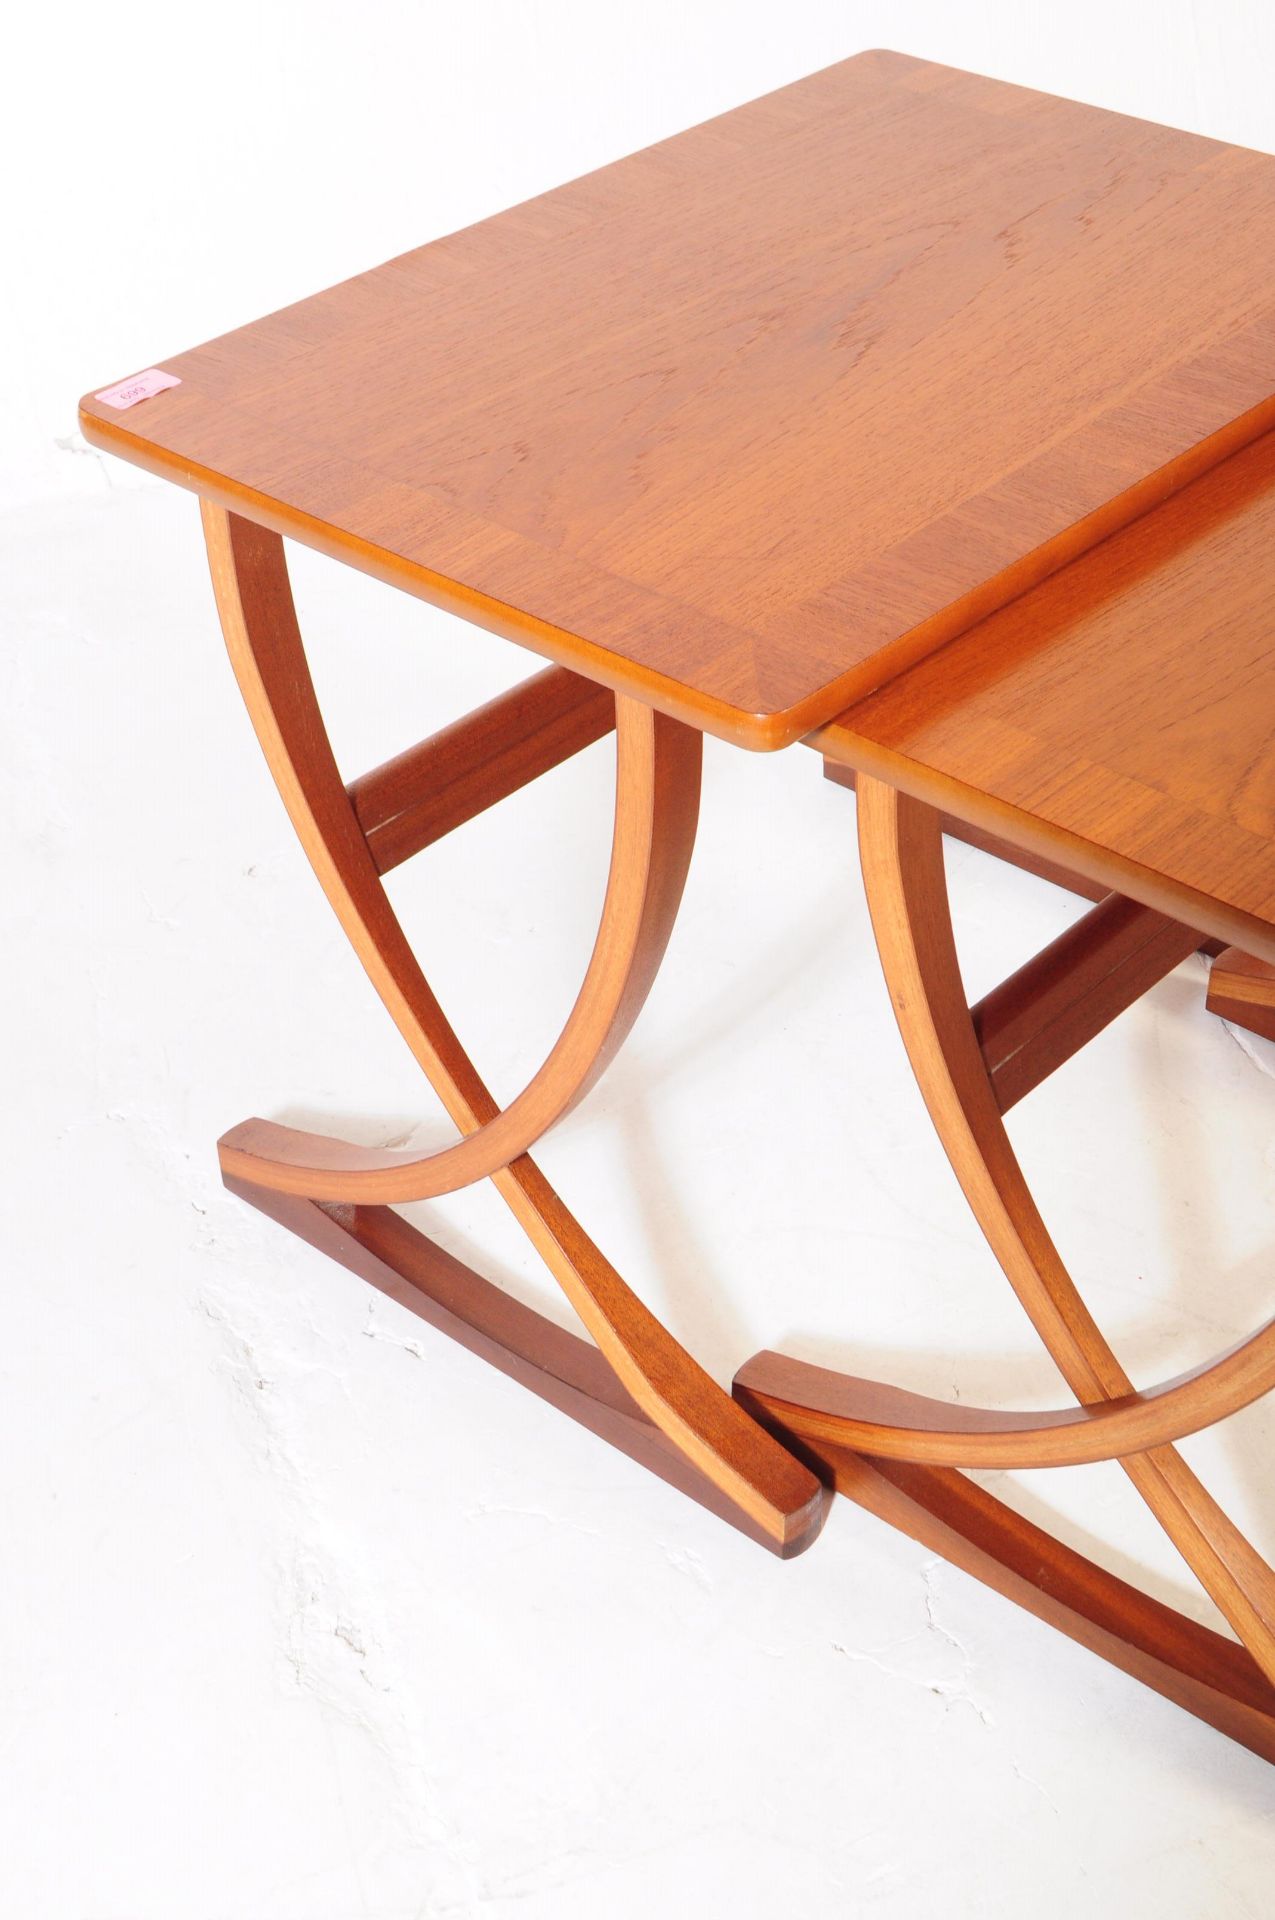 NATHAN - TWO MID CENTURY CITADEL NESTING TABLES - Image 3 of 4